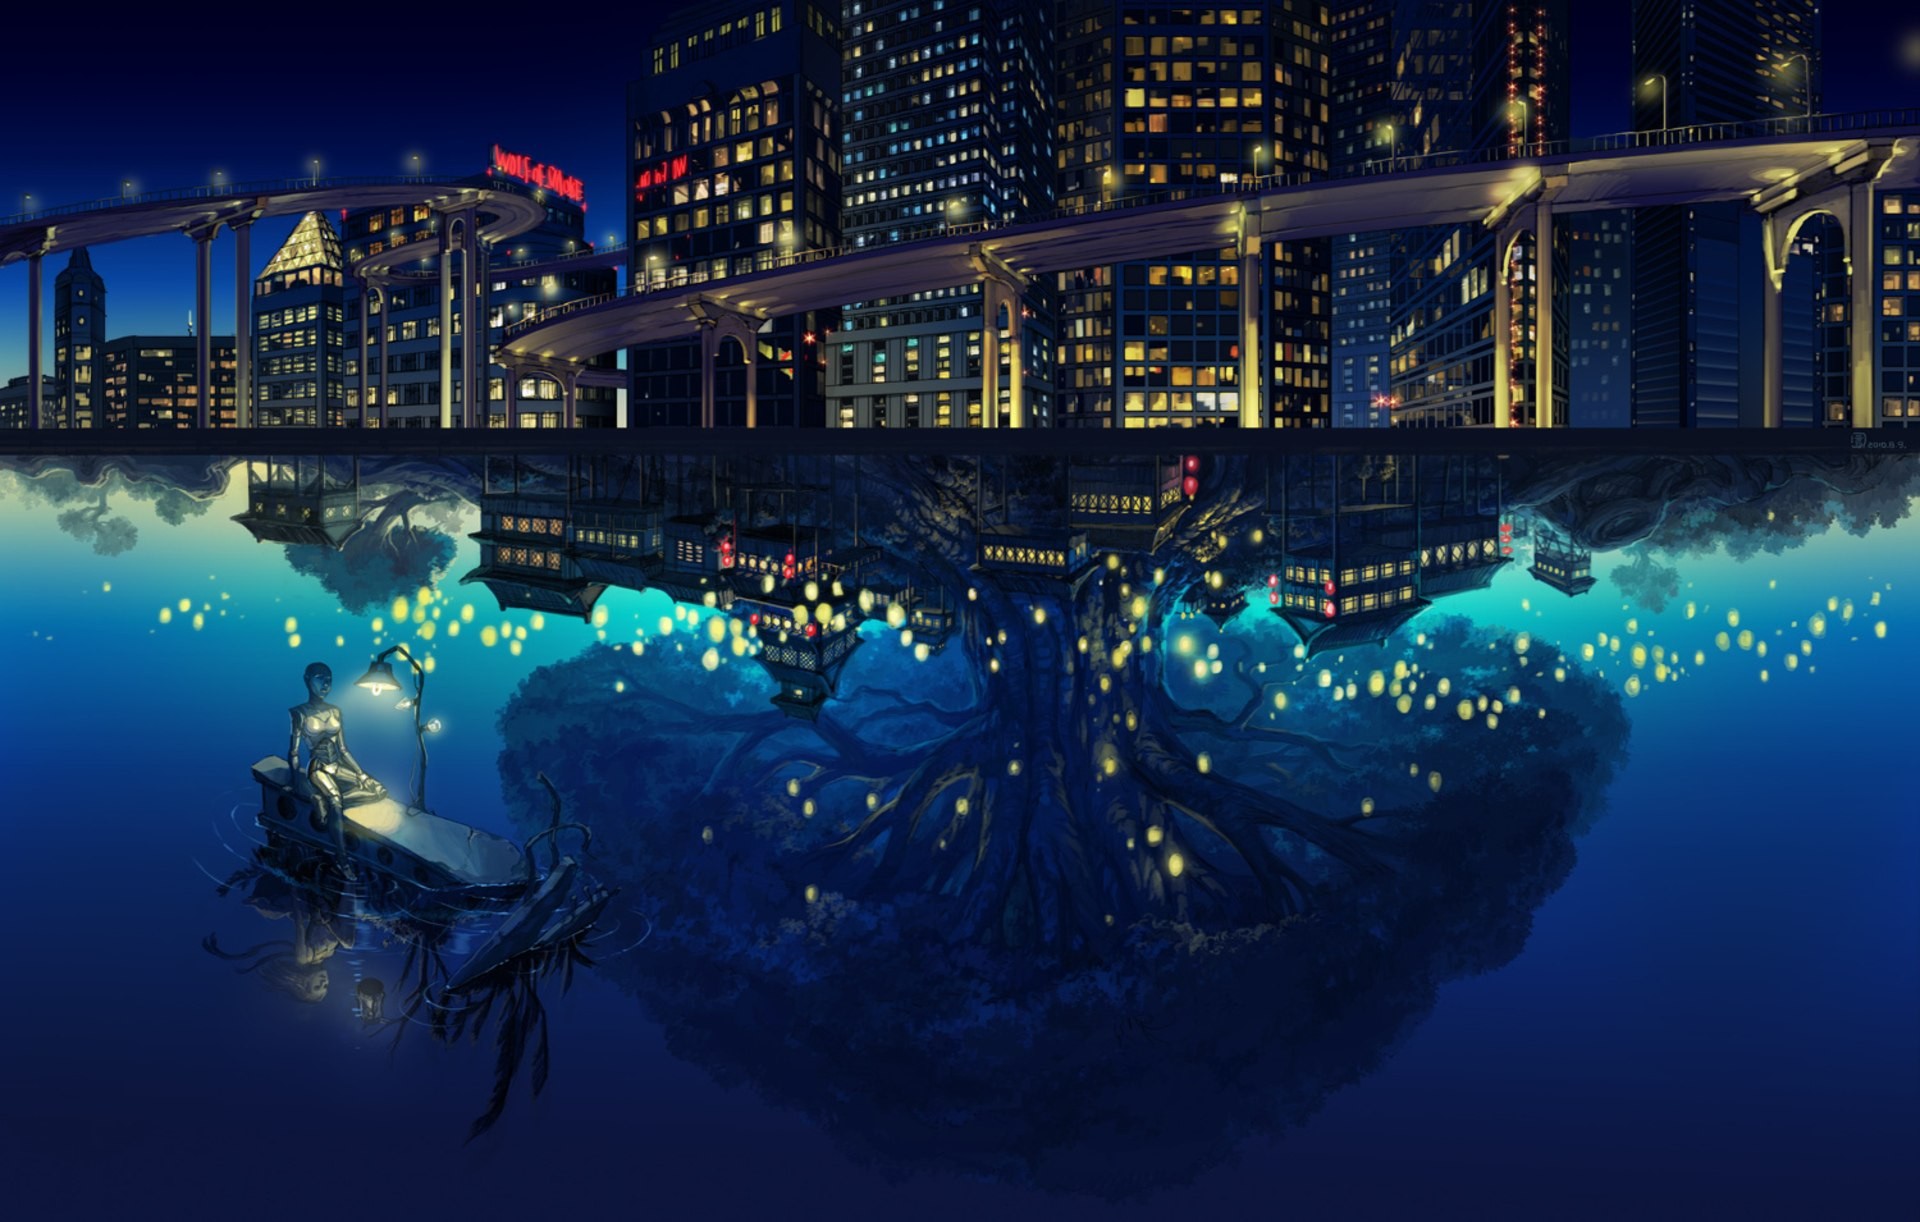 Wallpaper : lights, sea, city, cityscape, night, water, reflection, sky, Earth, skyline, blue, world, atmosphere, metropolis, midnight, buildings, darkness, screenshot, computer wallpaper, special effects, 1920x1222 px 1920x1222